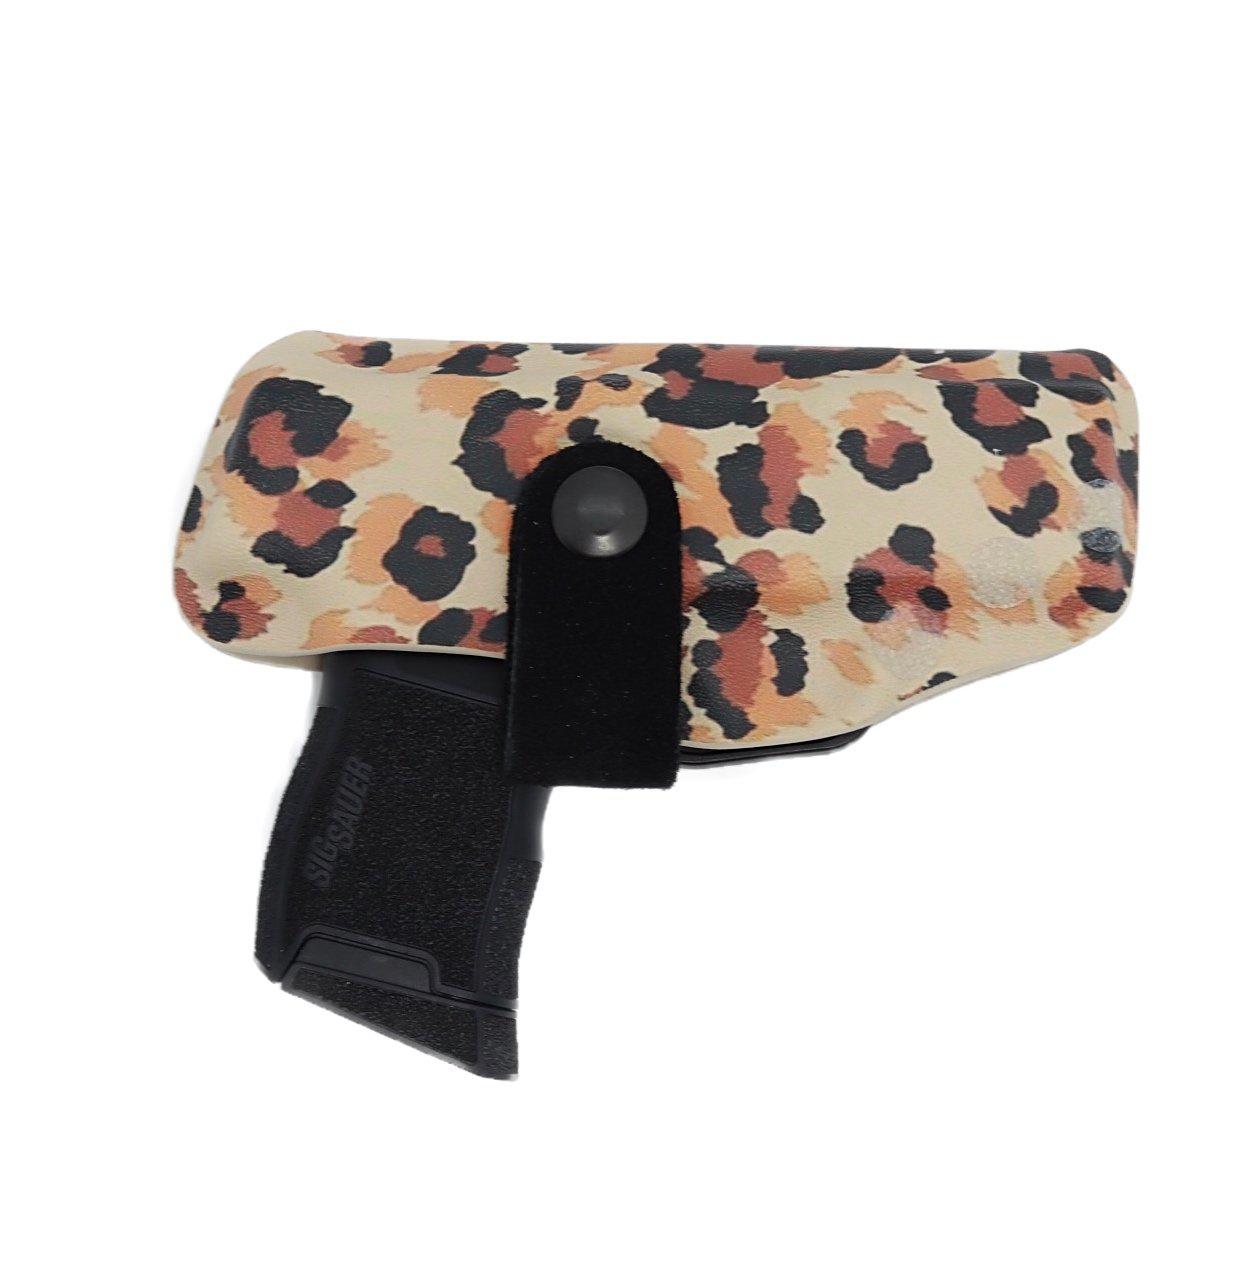 Flashbang Bra Holster for Sig Sauer P238 Right Hand. for sale